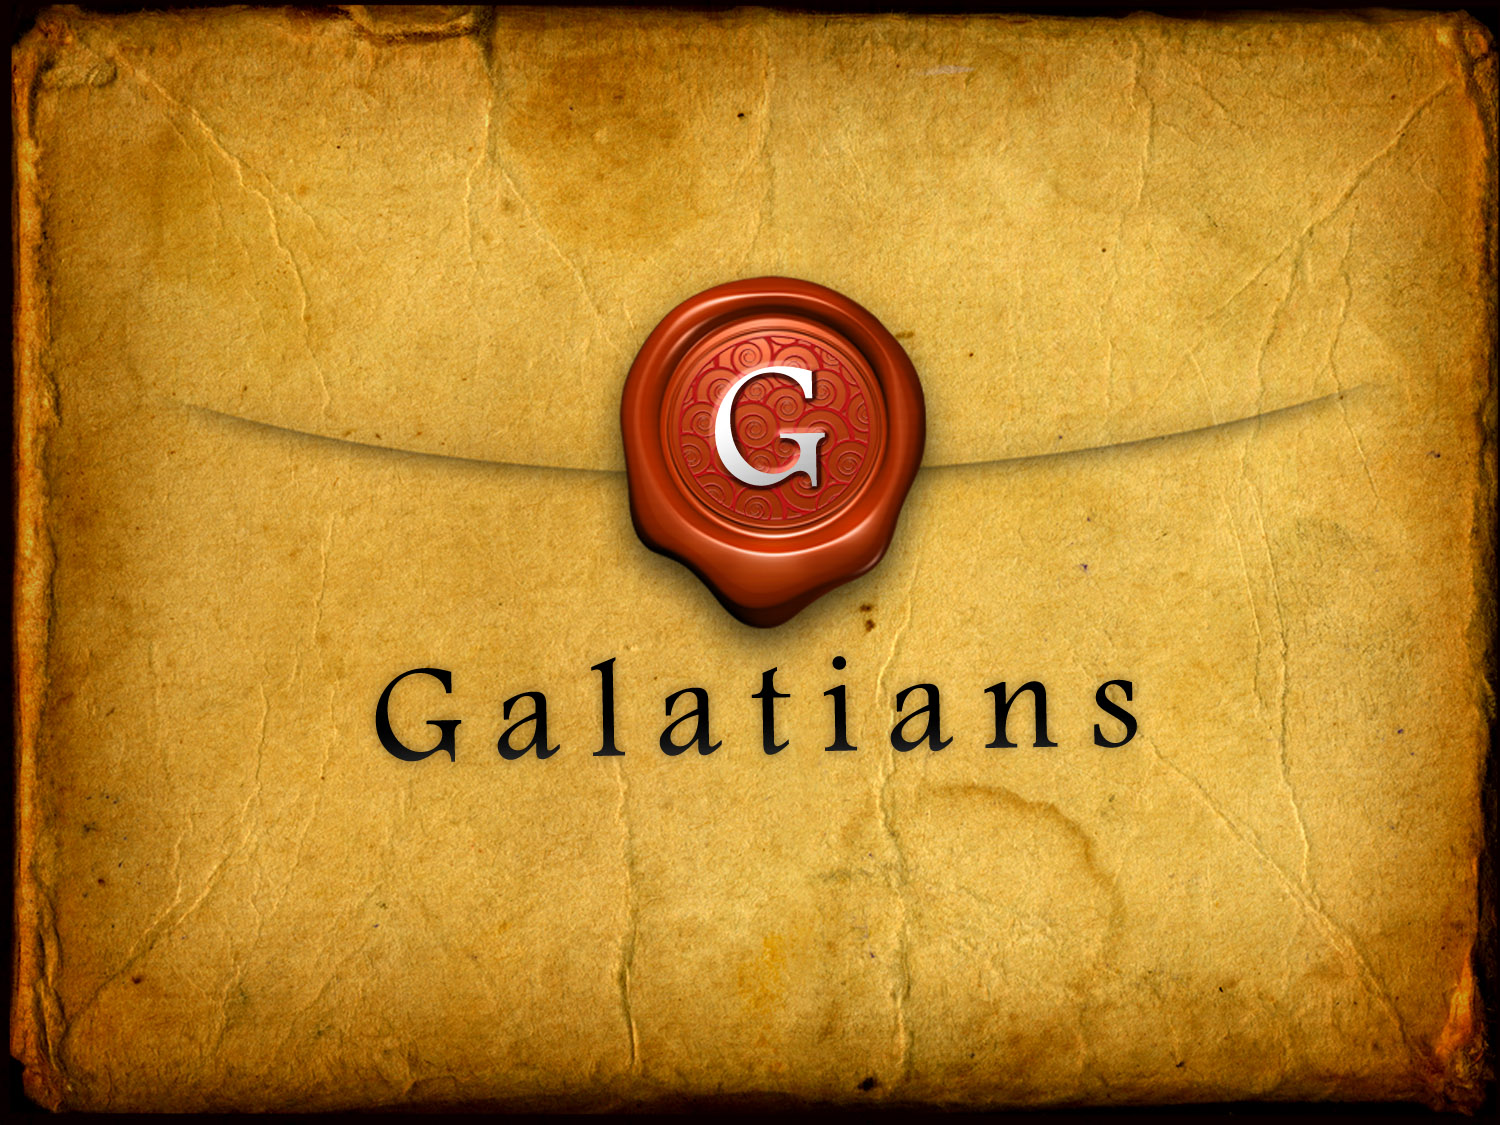 The Book of Galatians 3:11-14